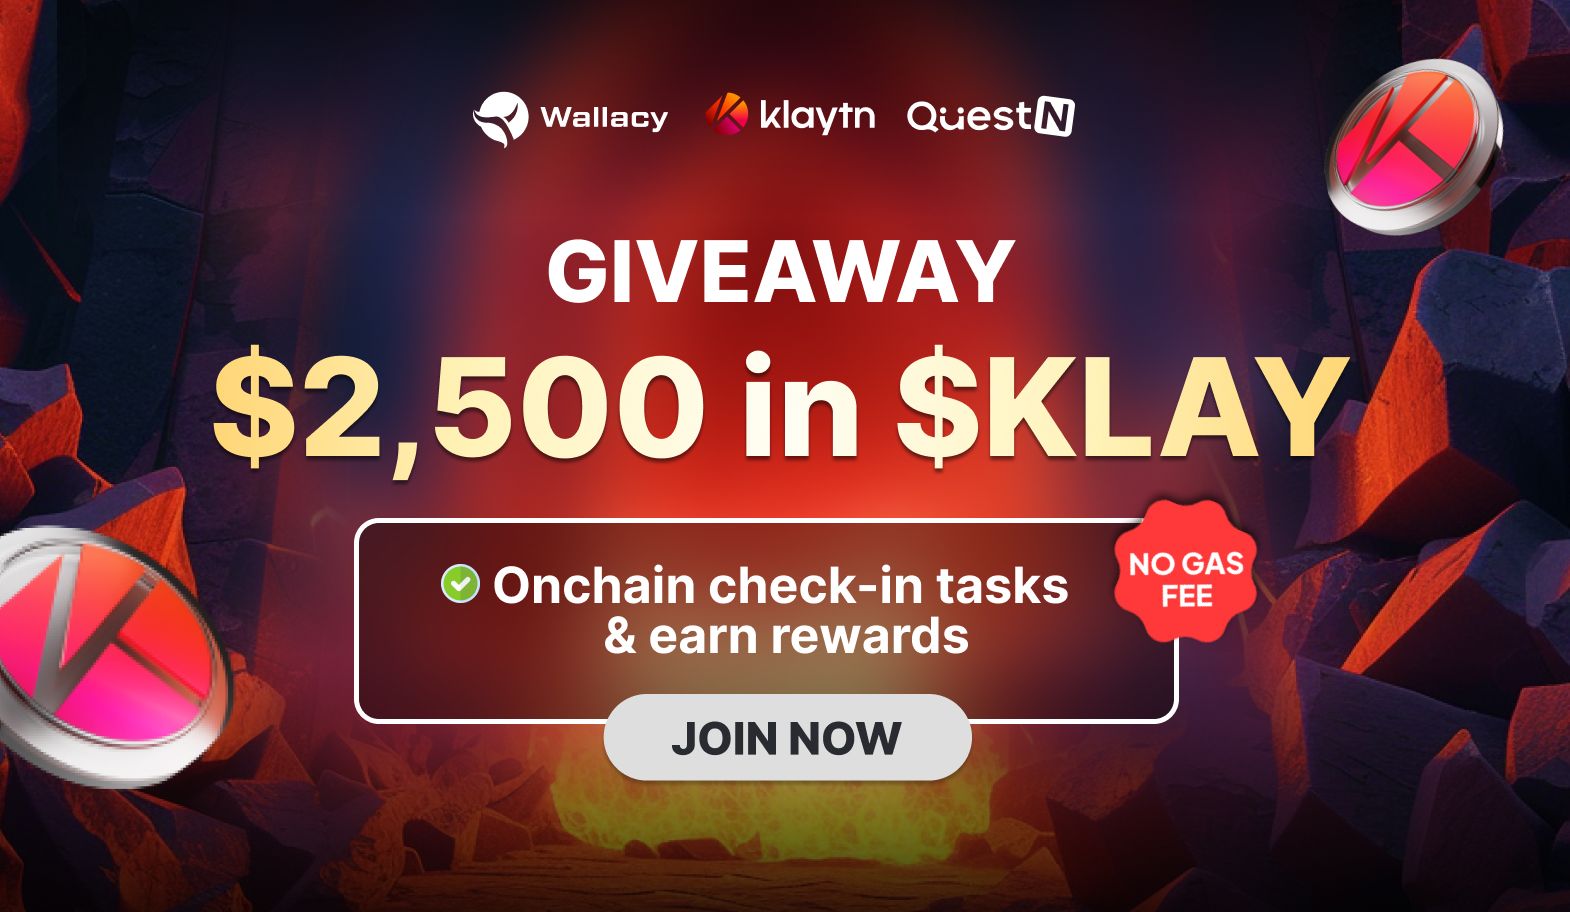 [QuestN] $2,500 in $KLAY Giveaway - Celebrate the Wallacy and Klaytn Partnership